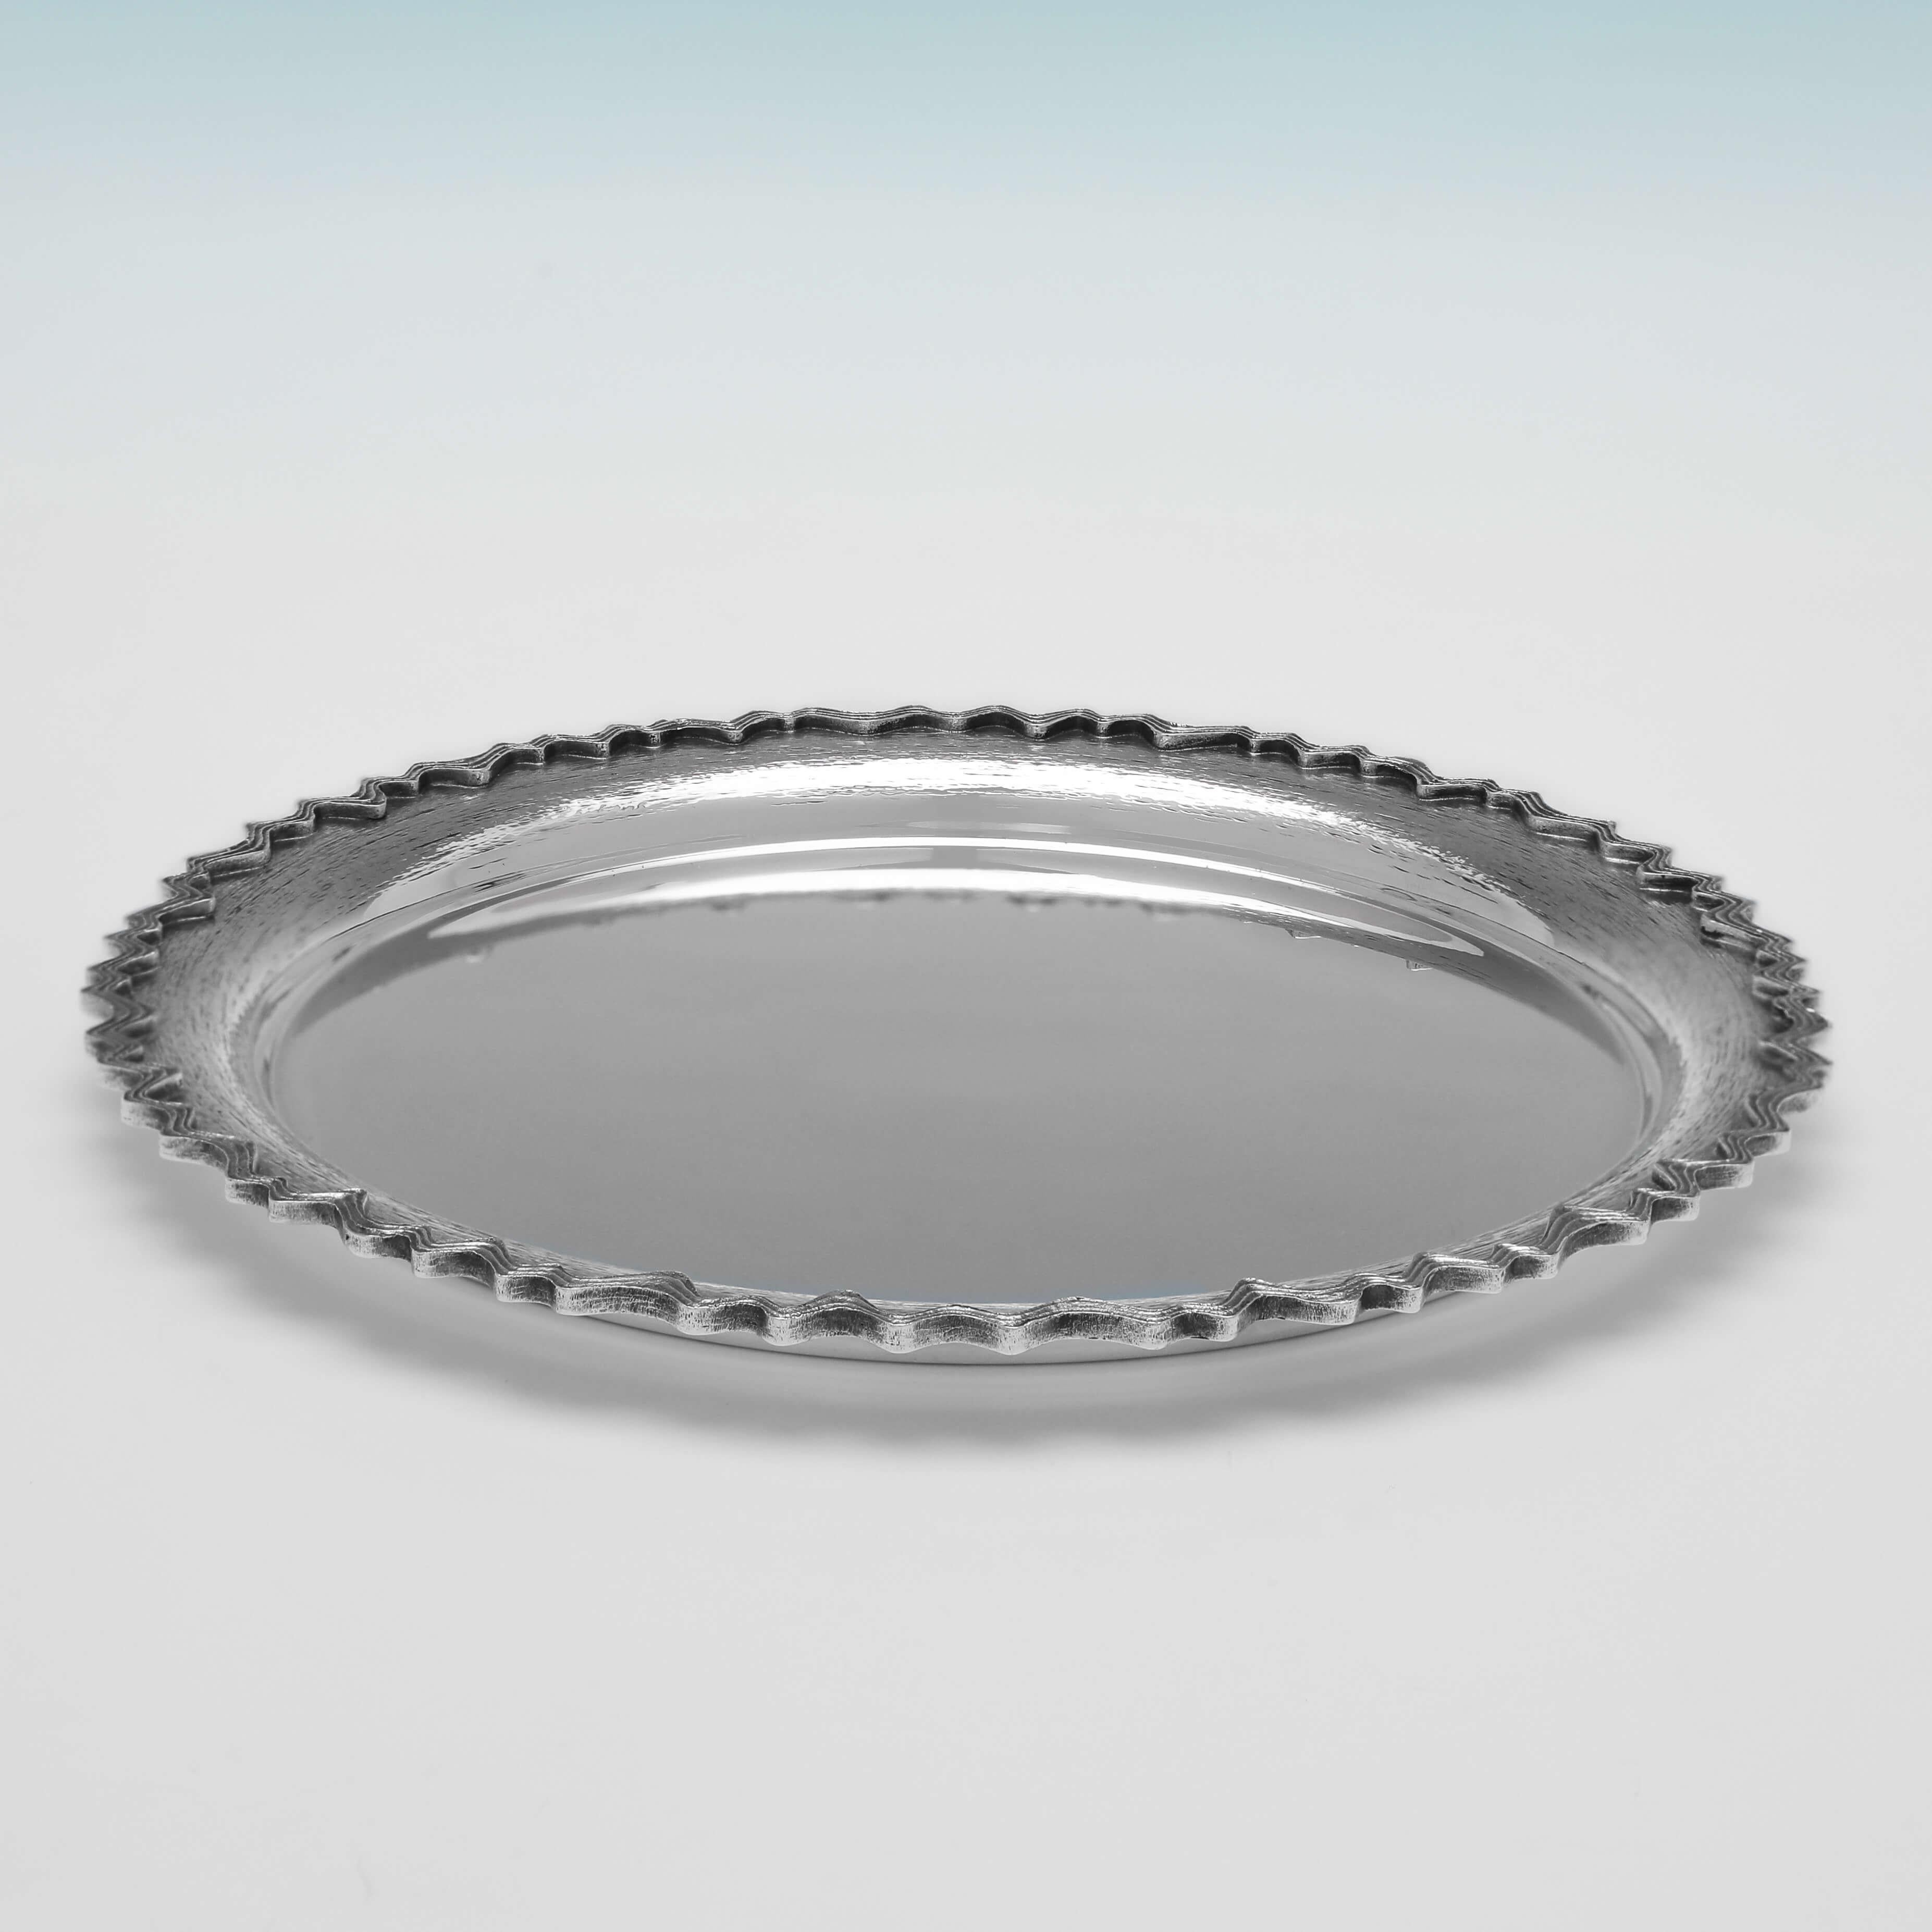 Hallmarked in London in 1975 by Christopher Lawrence, this stylish, Sterling Silver Dish, features a cast shaped border, and textured detailing. The dish measures 8